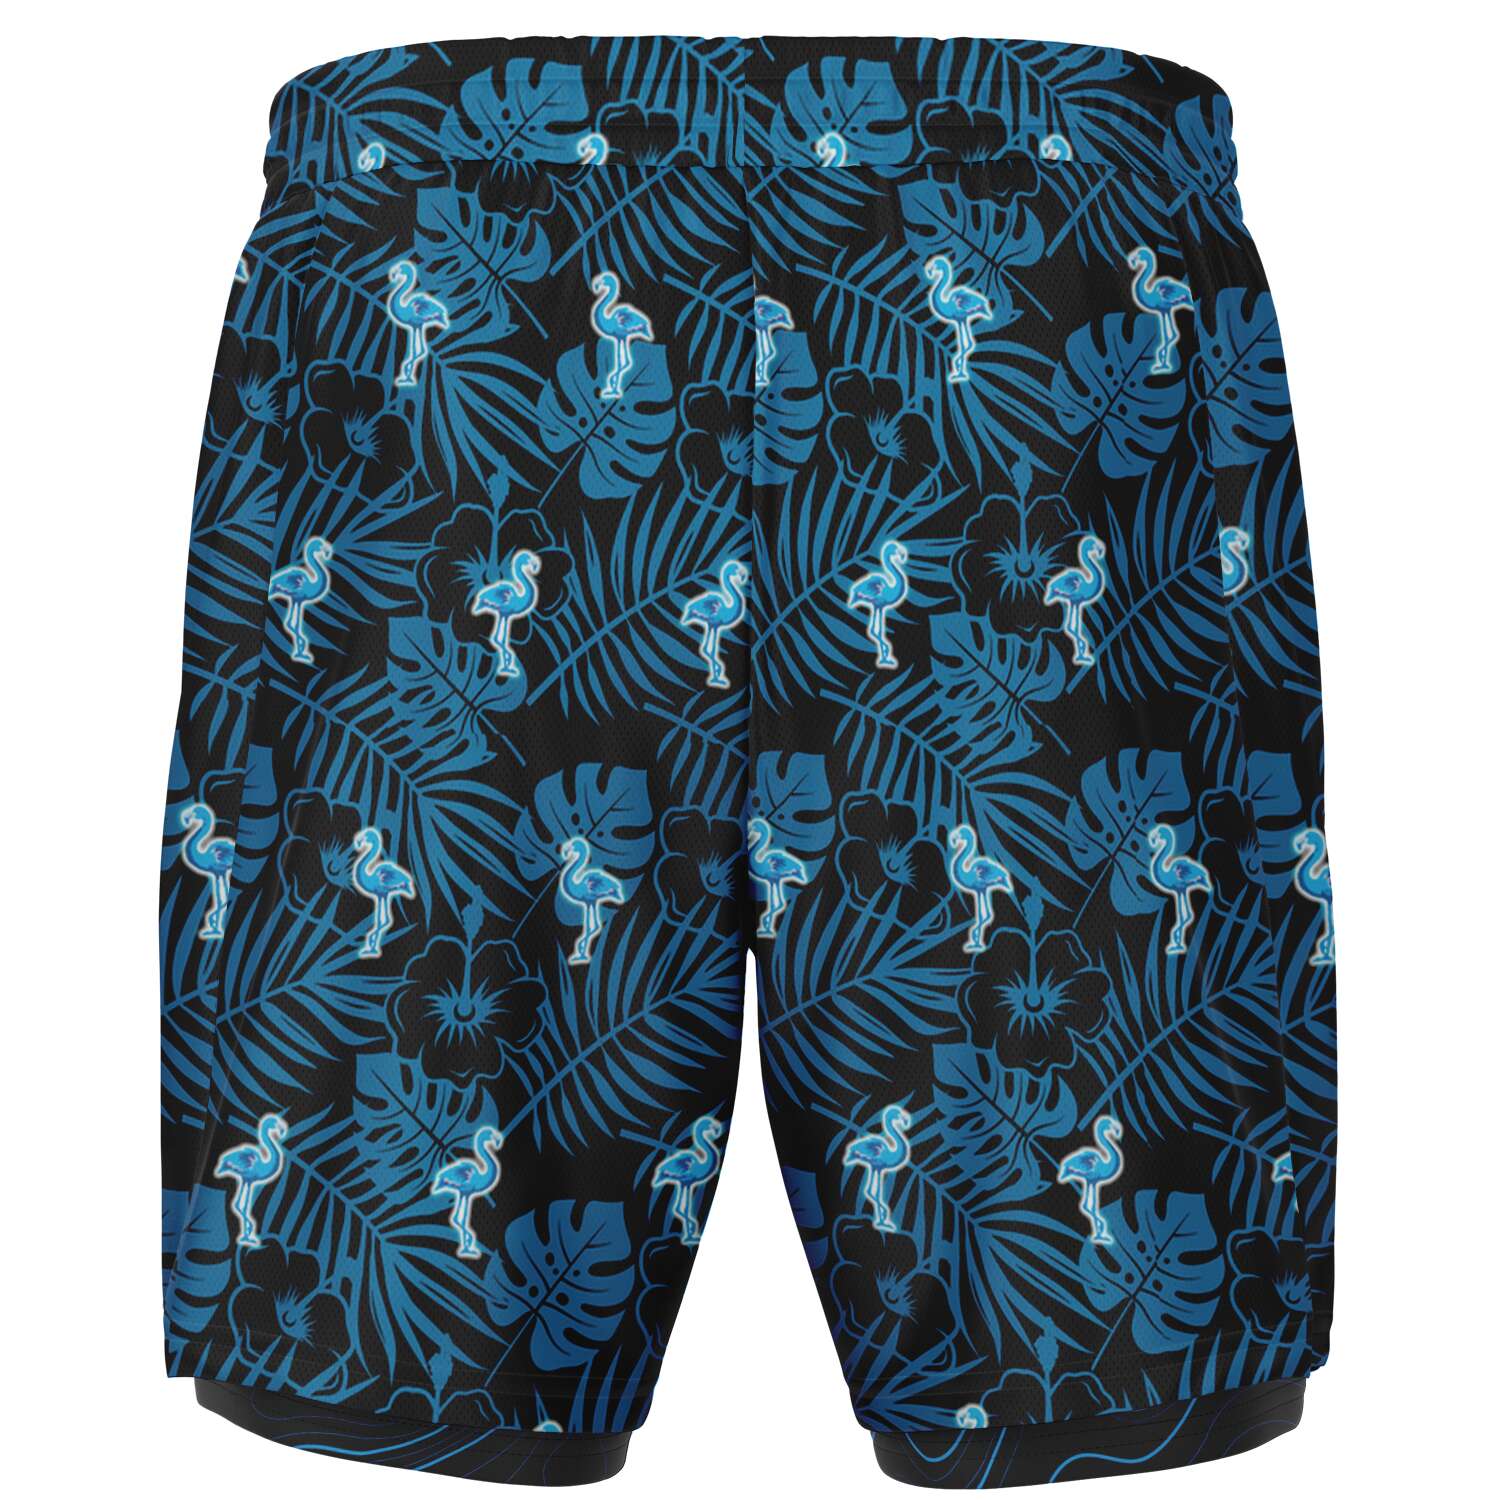 Rad Palm Party Like A Flockstar Men's 2-in-1 Shorts